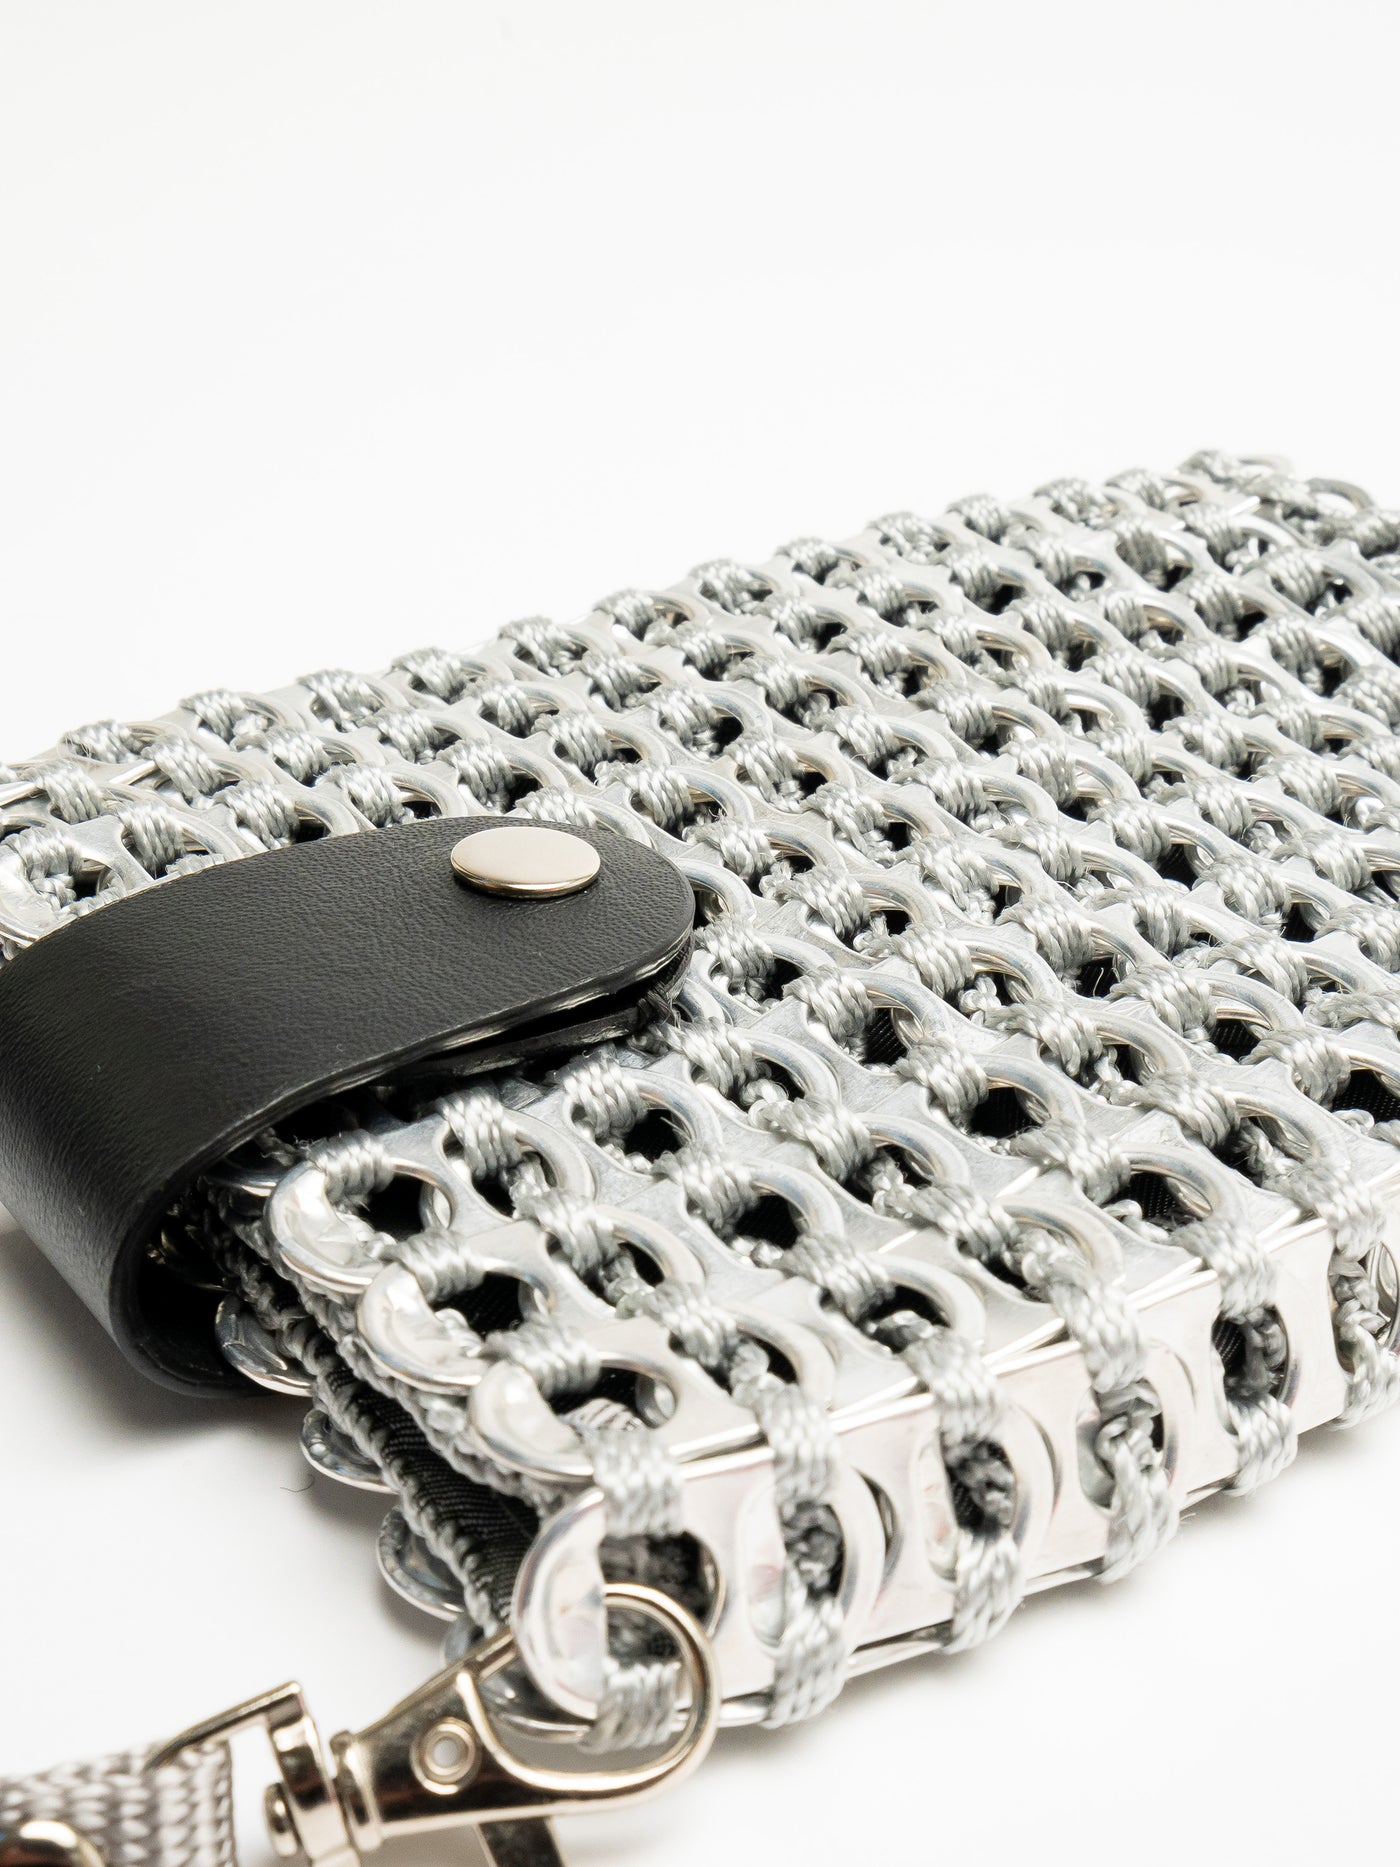 alt="crossbody phone bag made from aluminum tabs with leather fold over snap closure - escama studio"